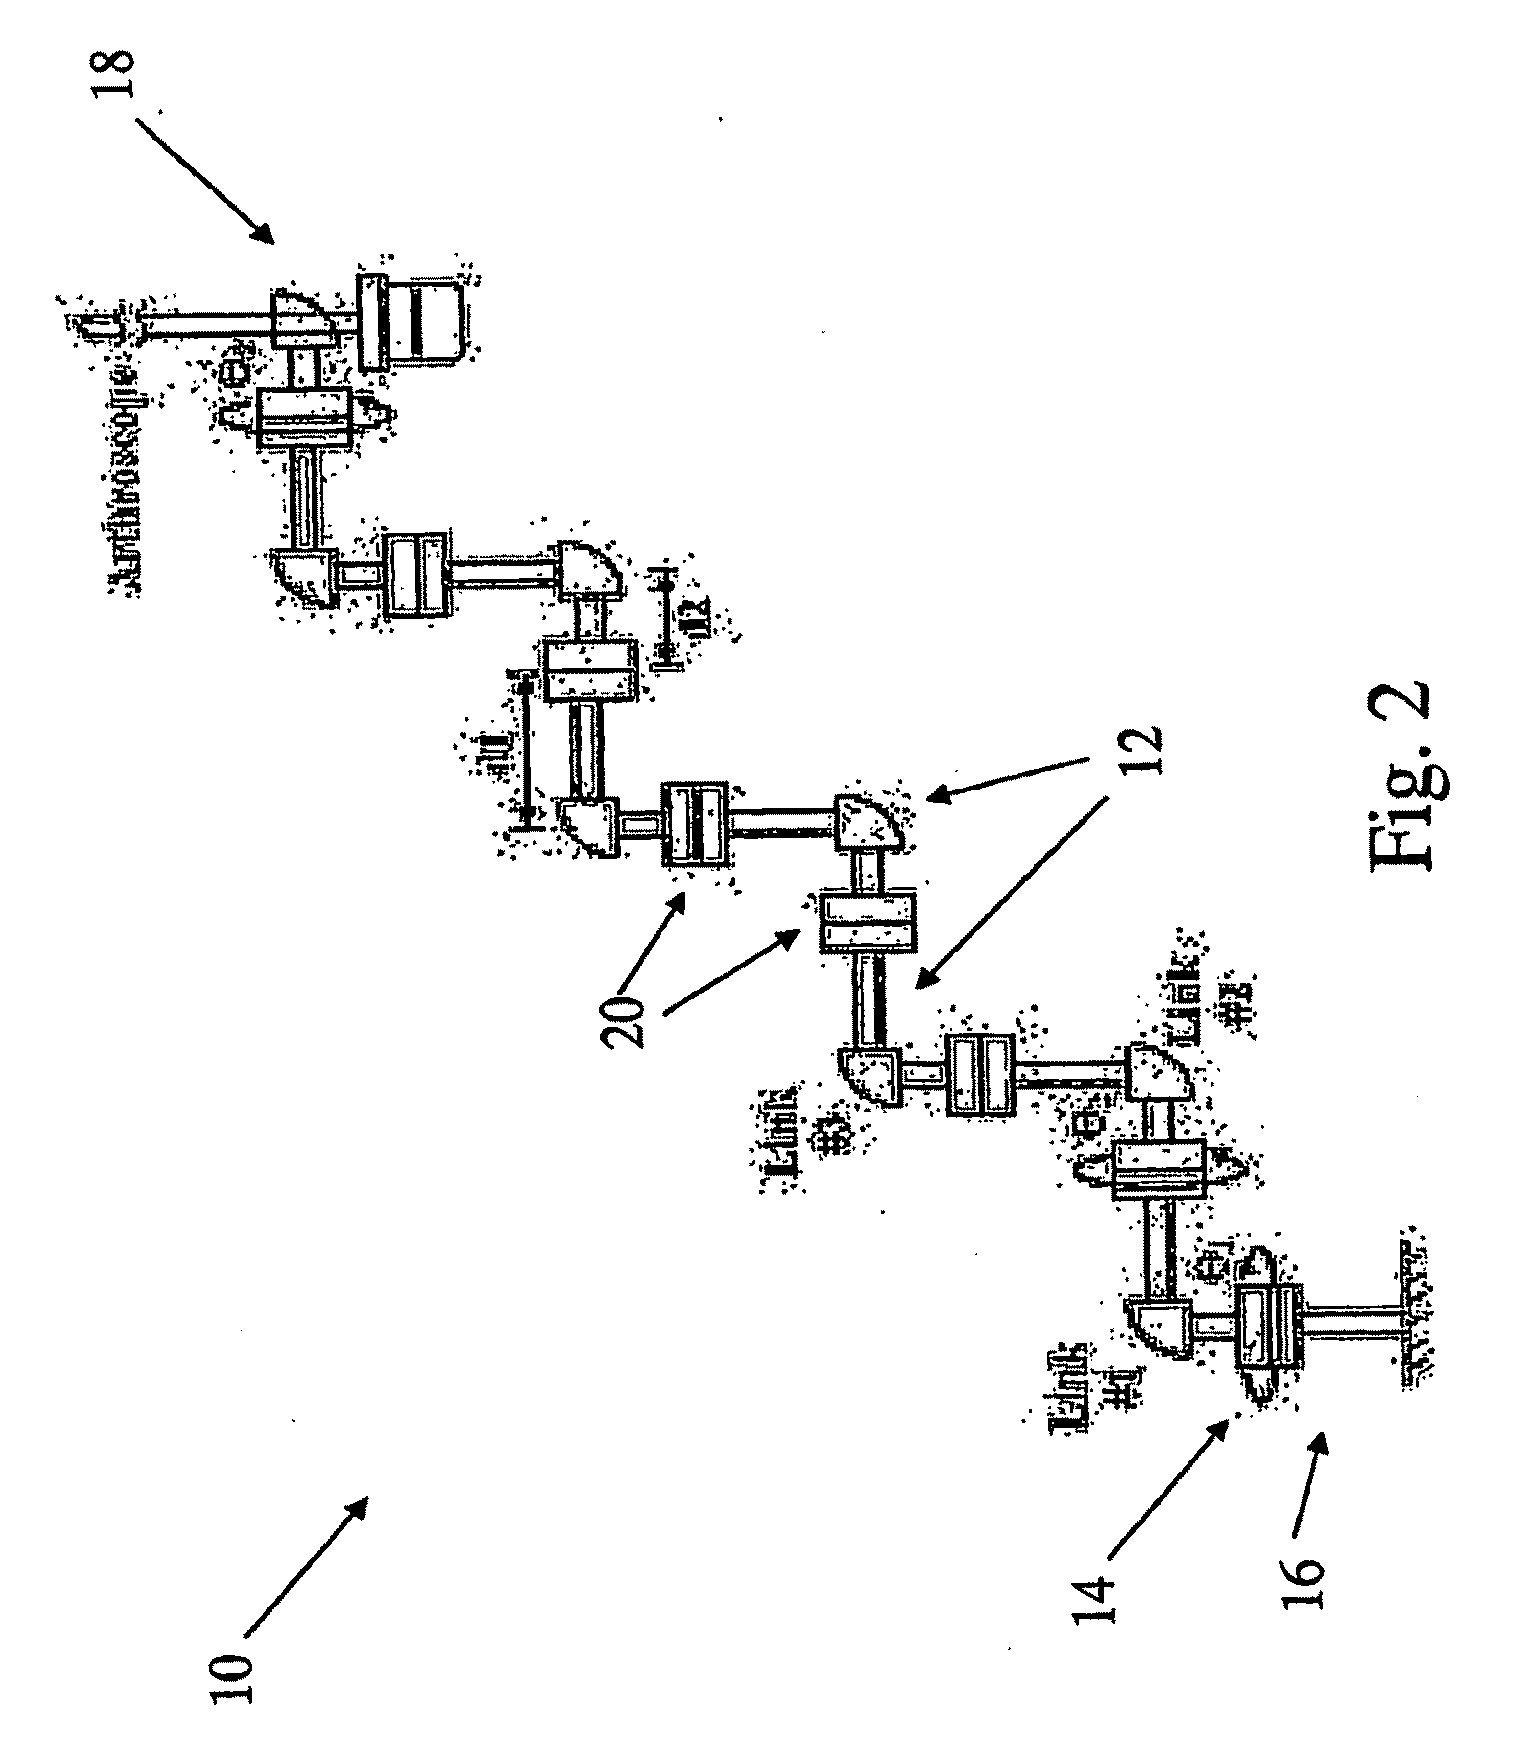 Method, Apparatus, And System For Computer-Aided Tracking, Navigation And Motion Teaching